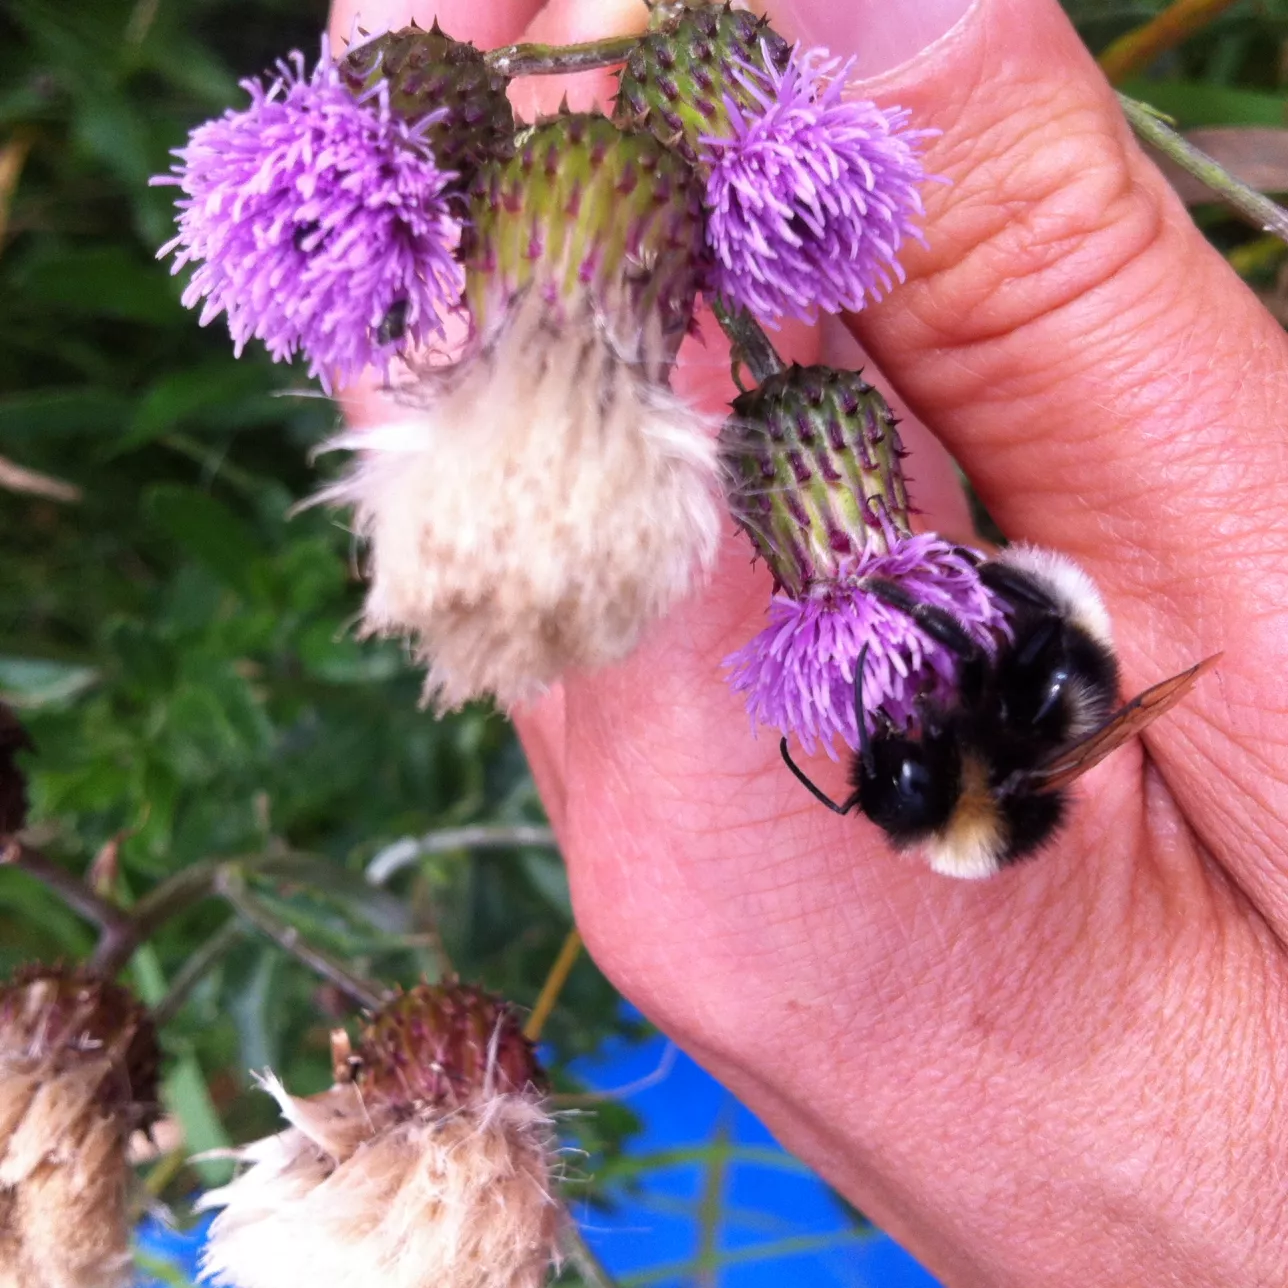 Bumblebee on thistle flower held by hand. Photo.